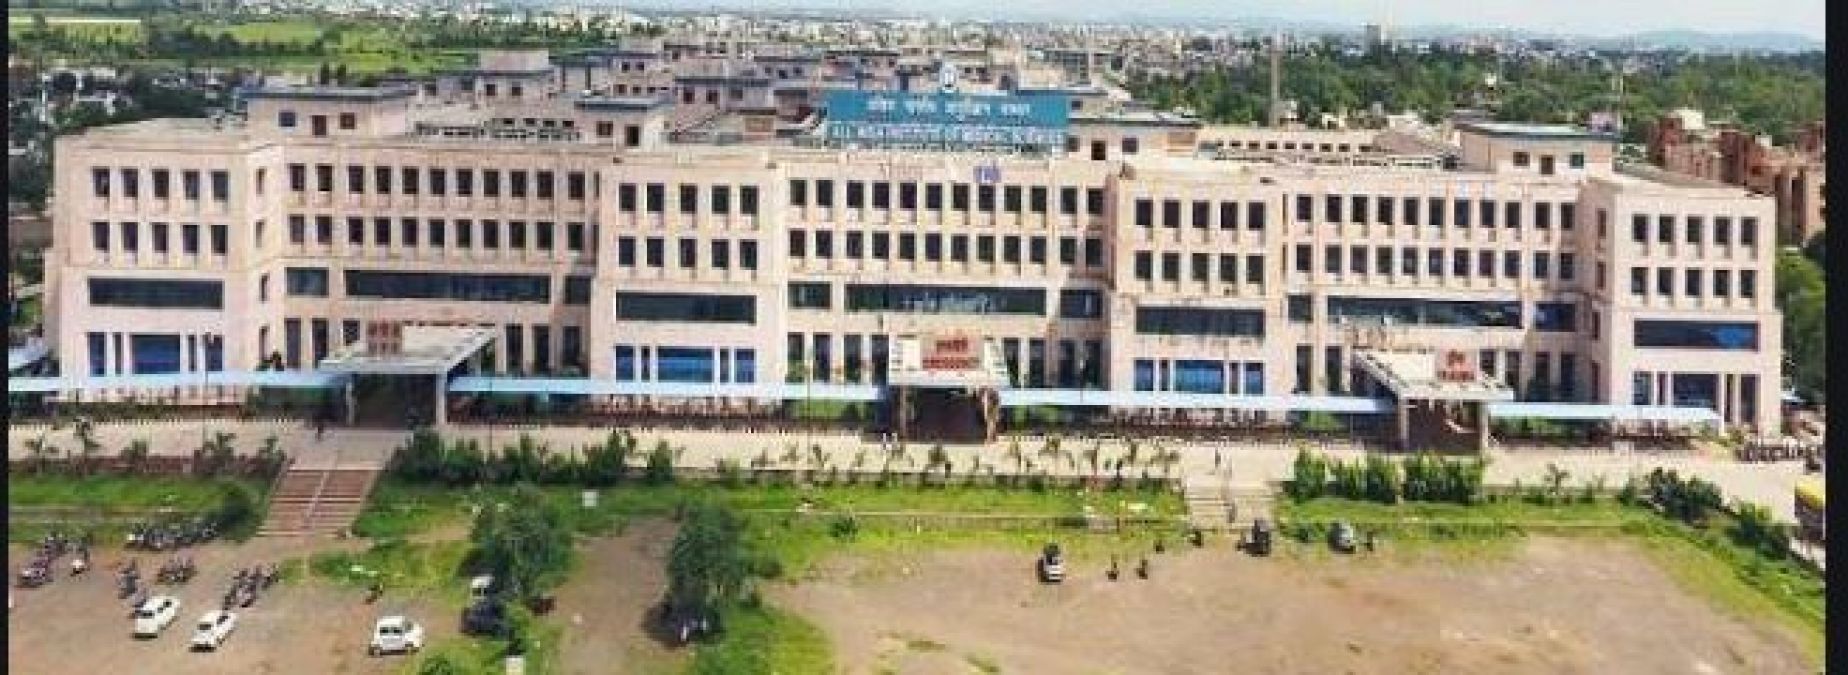 Bhopal AIIMS to have all tests below Rs 50 free of cost